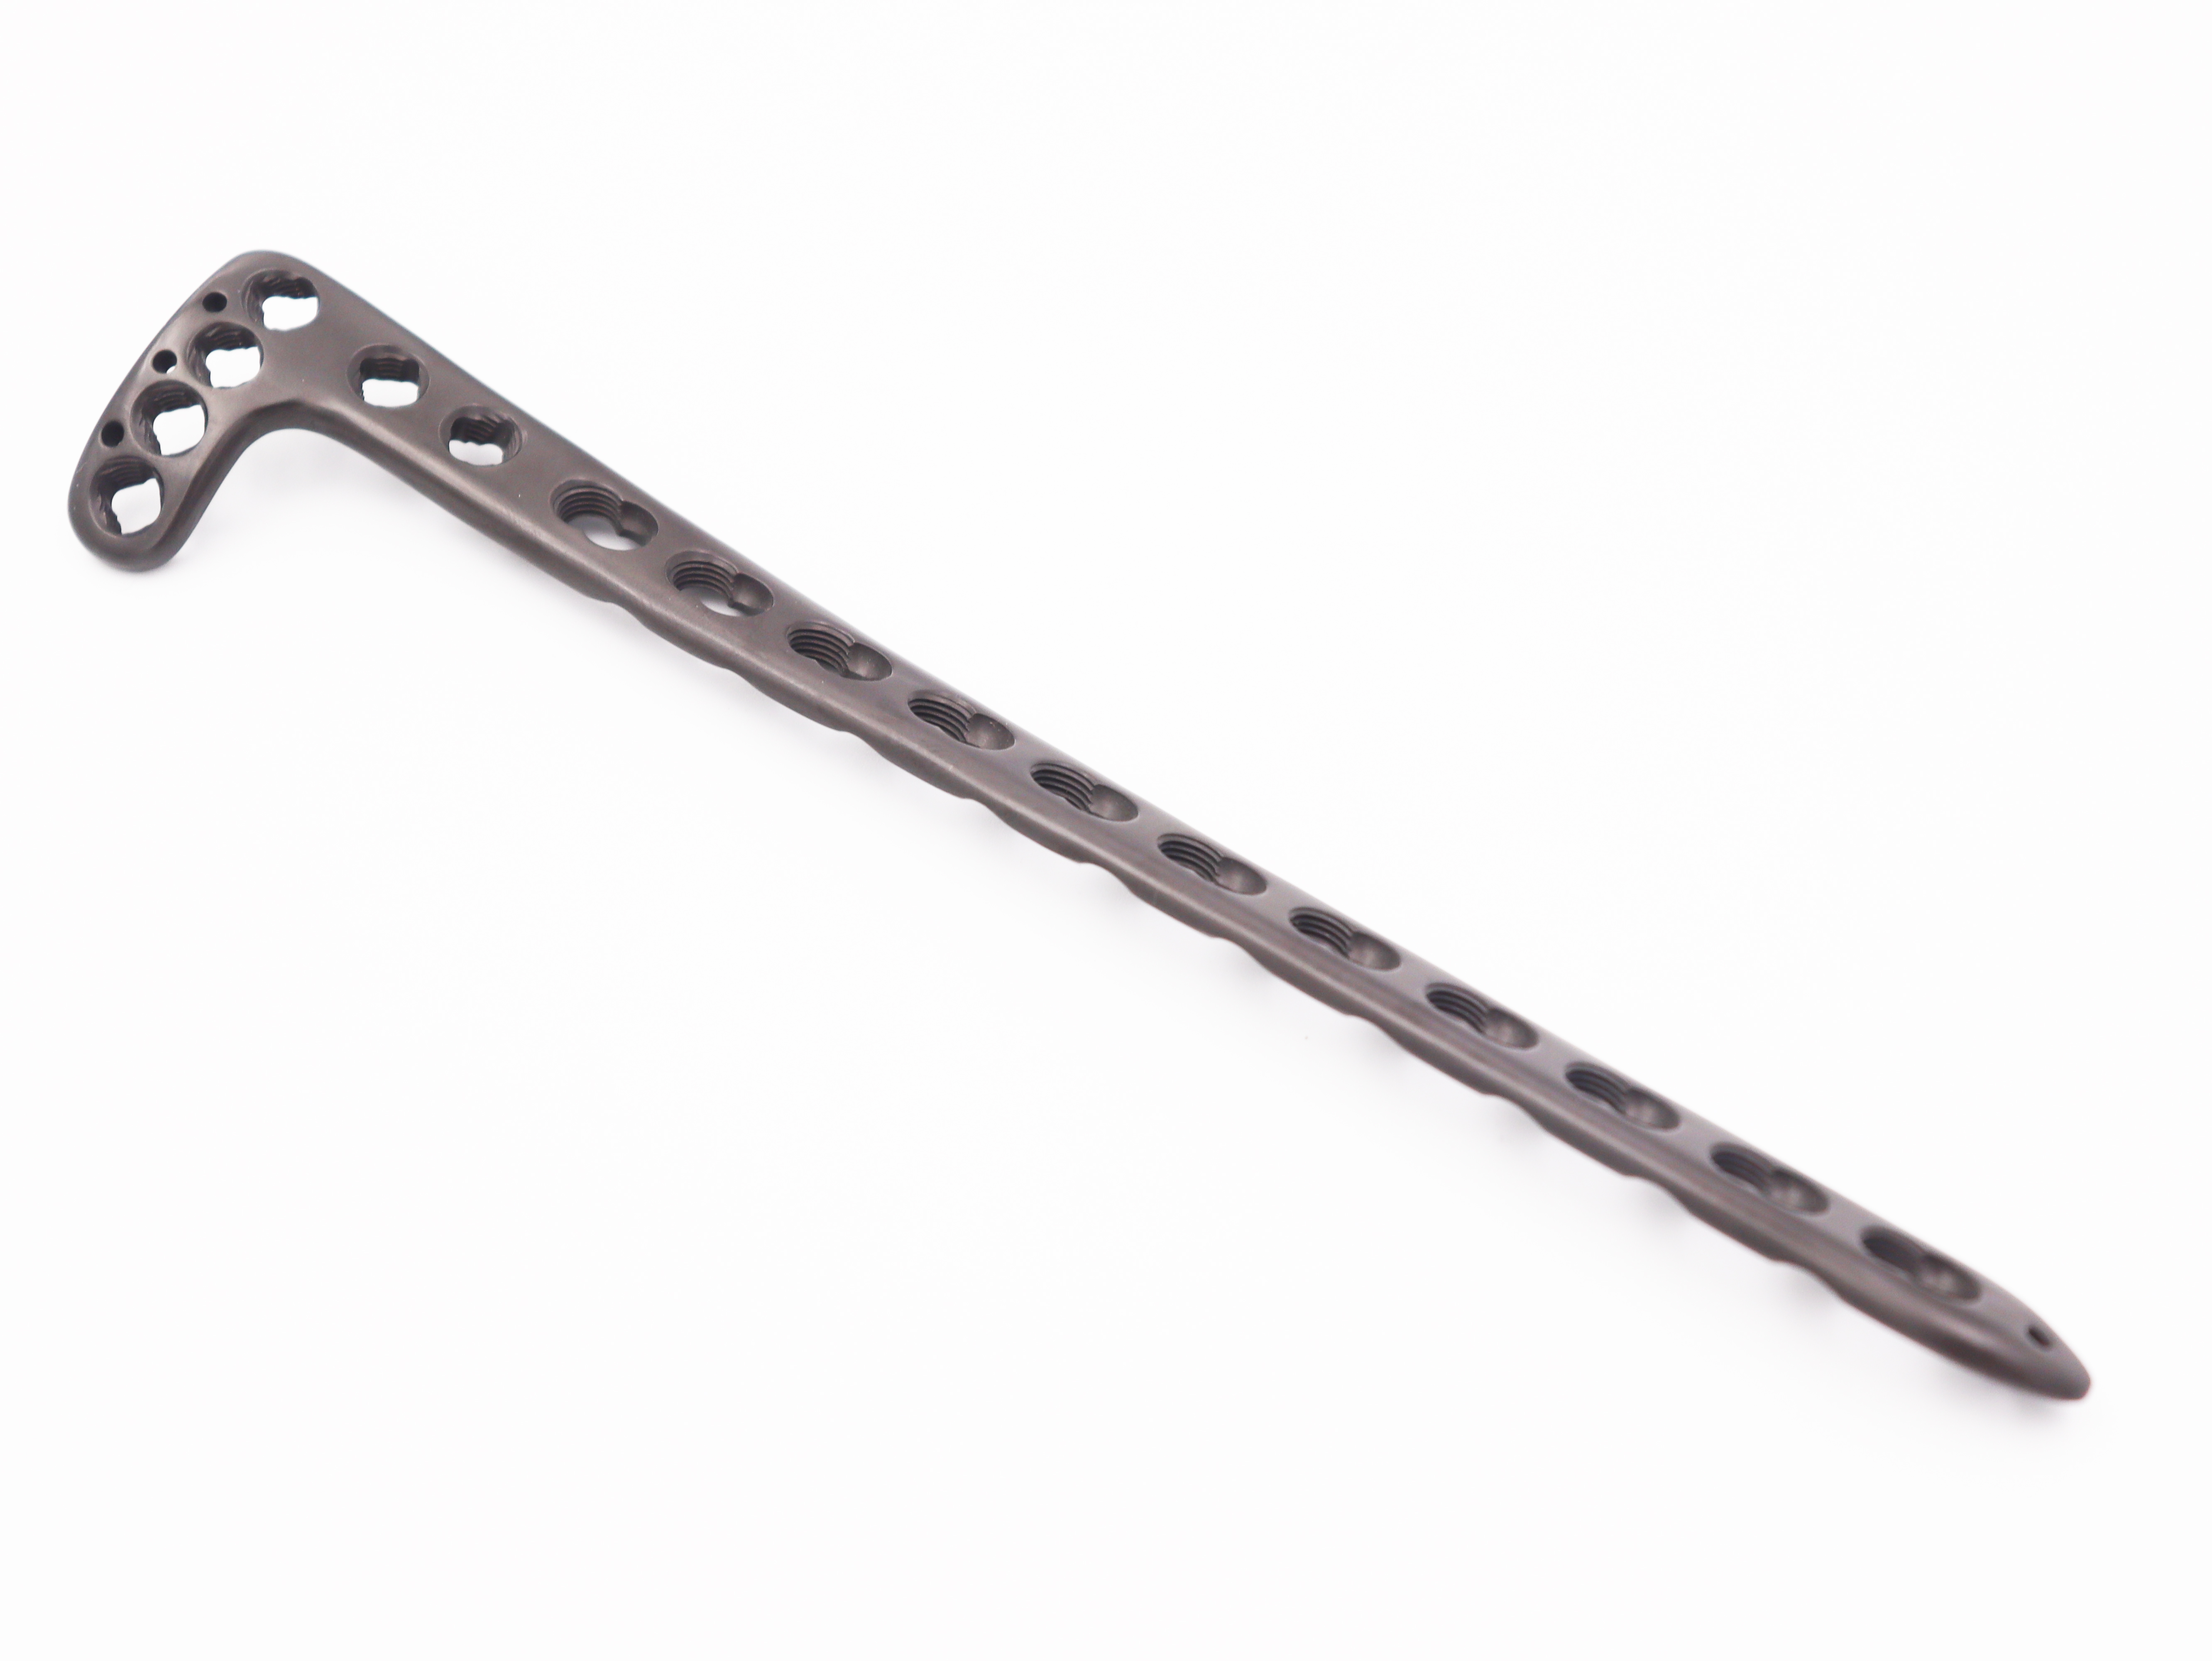 Orthopedic implants Manufacturer materials Multi-axial distal tibial Anterolateral Locking Plate(left/right)